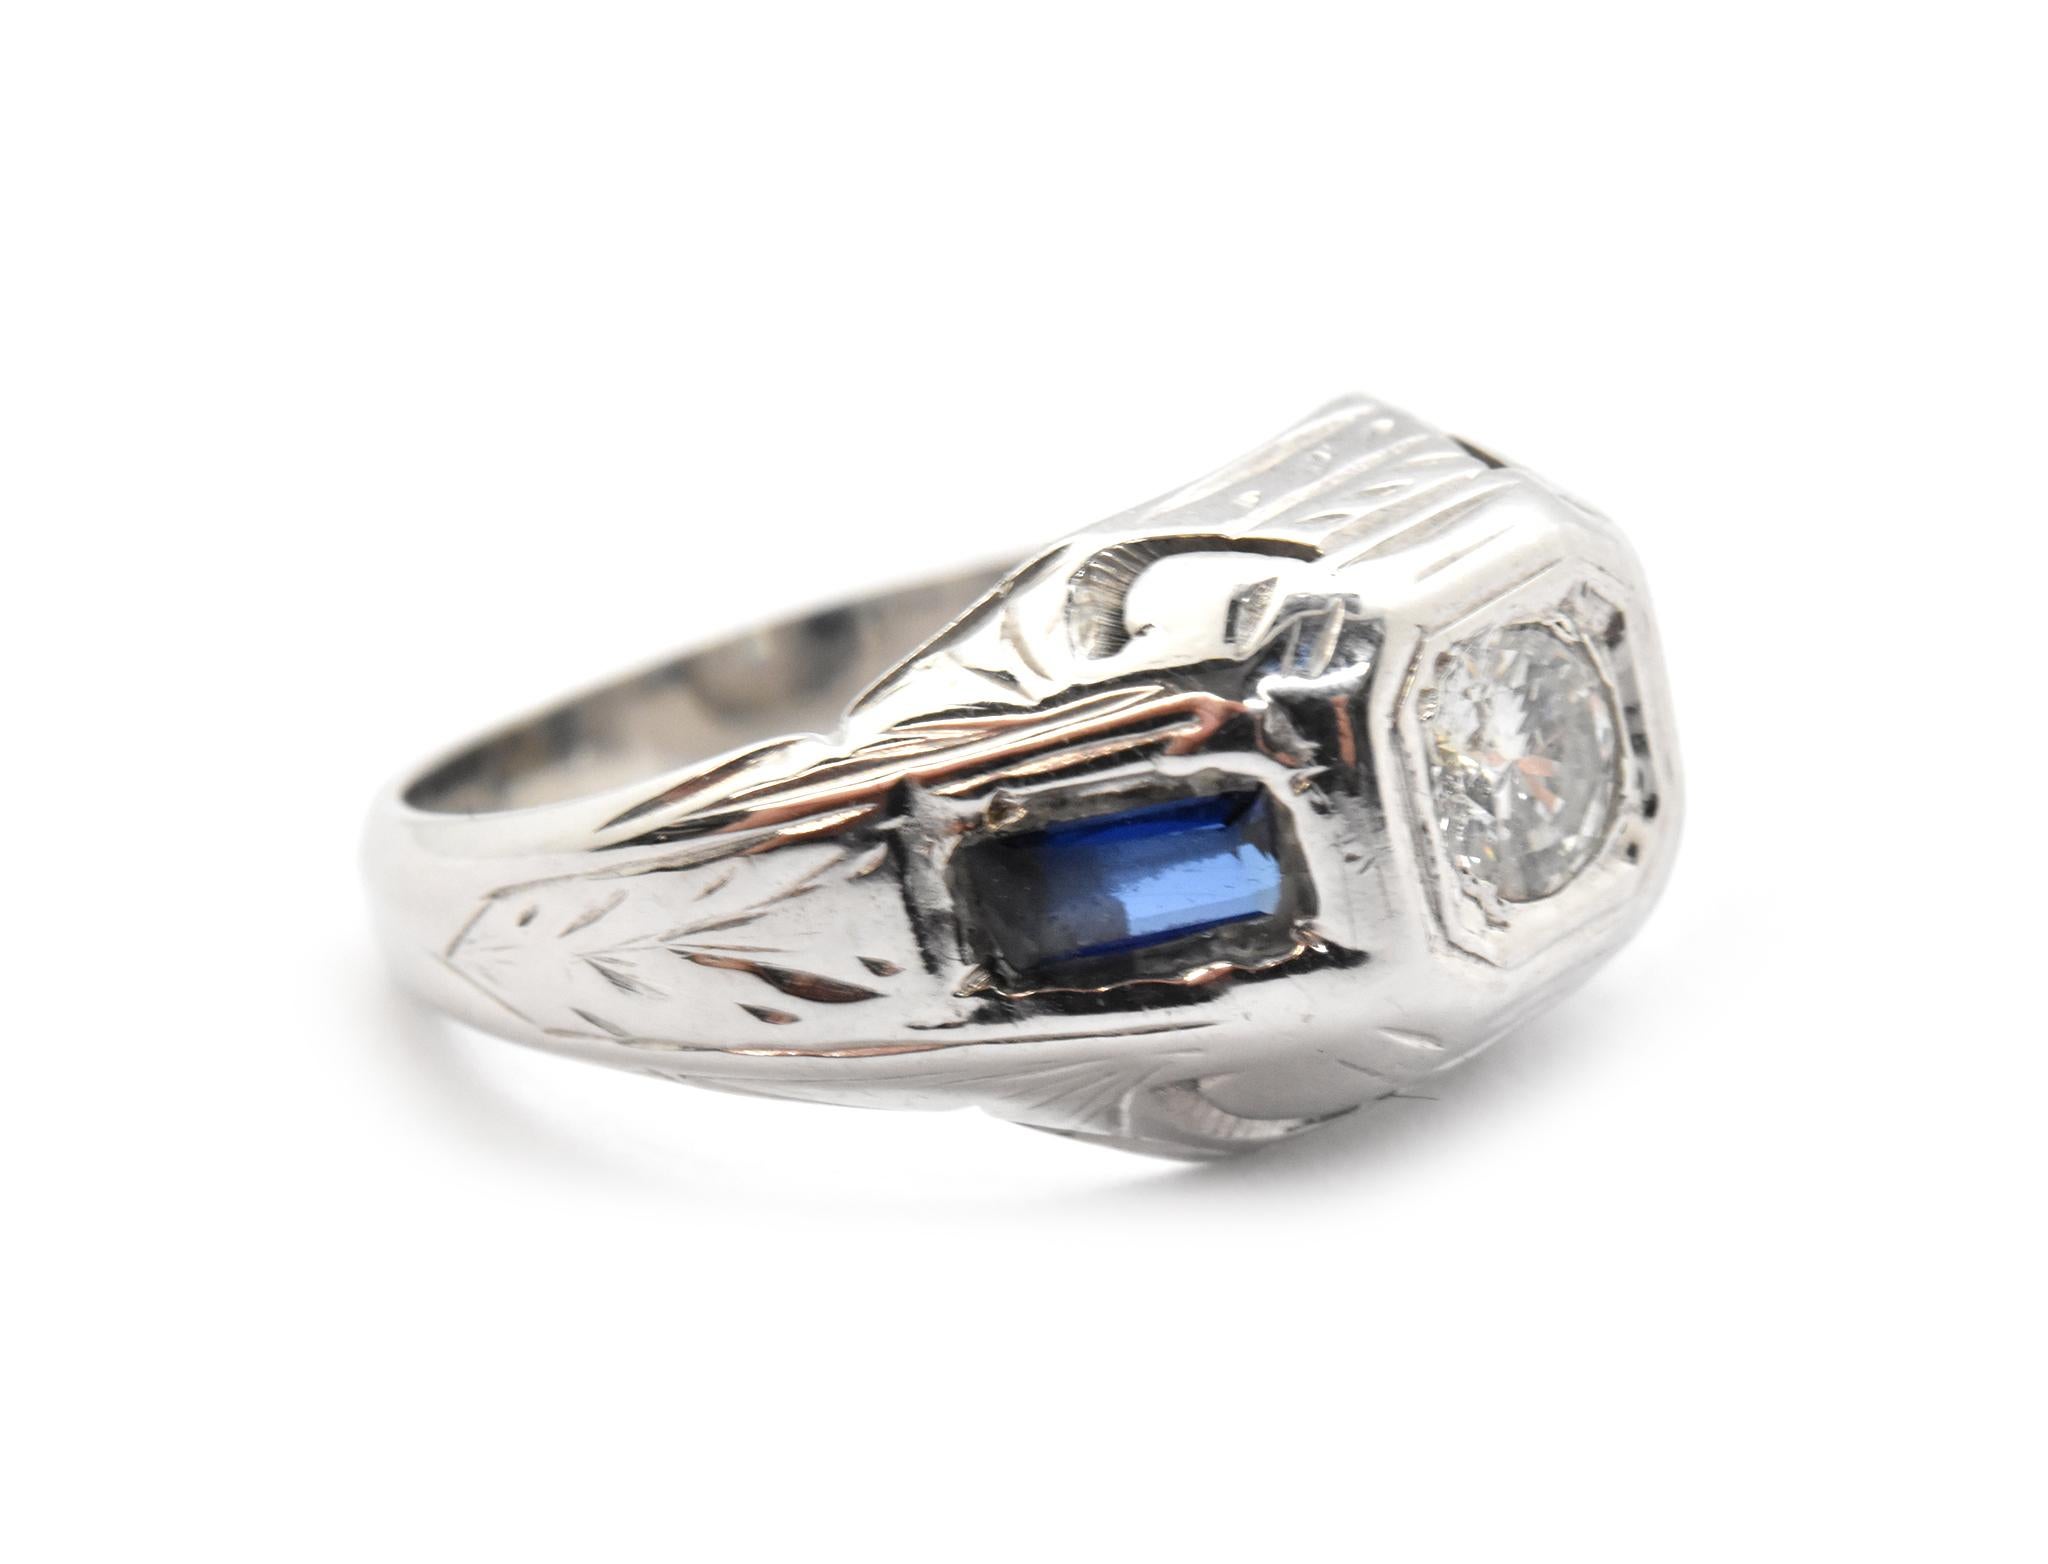 This lovely vintage ring is made in 18k white gold, and it holds a 0.12ct round brilliant cut diamond at its center. The diamond is graded G-H in color and SI1 in clarity.  There are two 4x2mm baguette blue sapphires set on either side. The ring